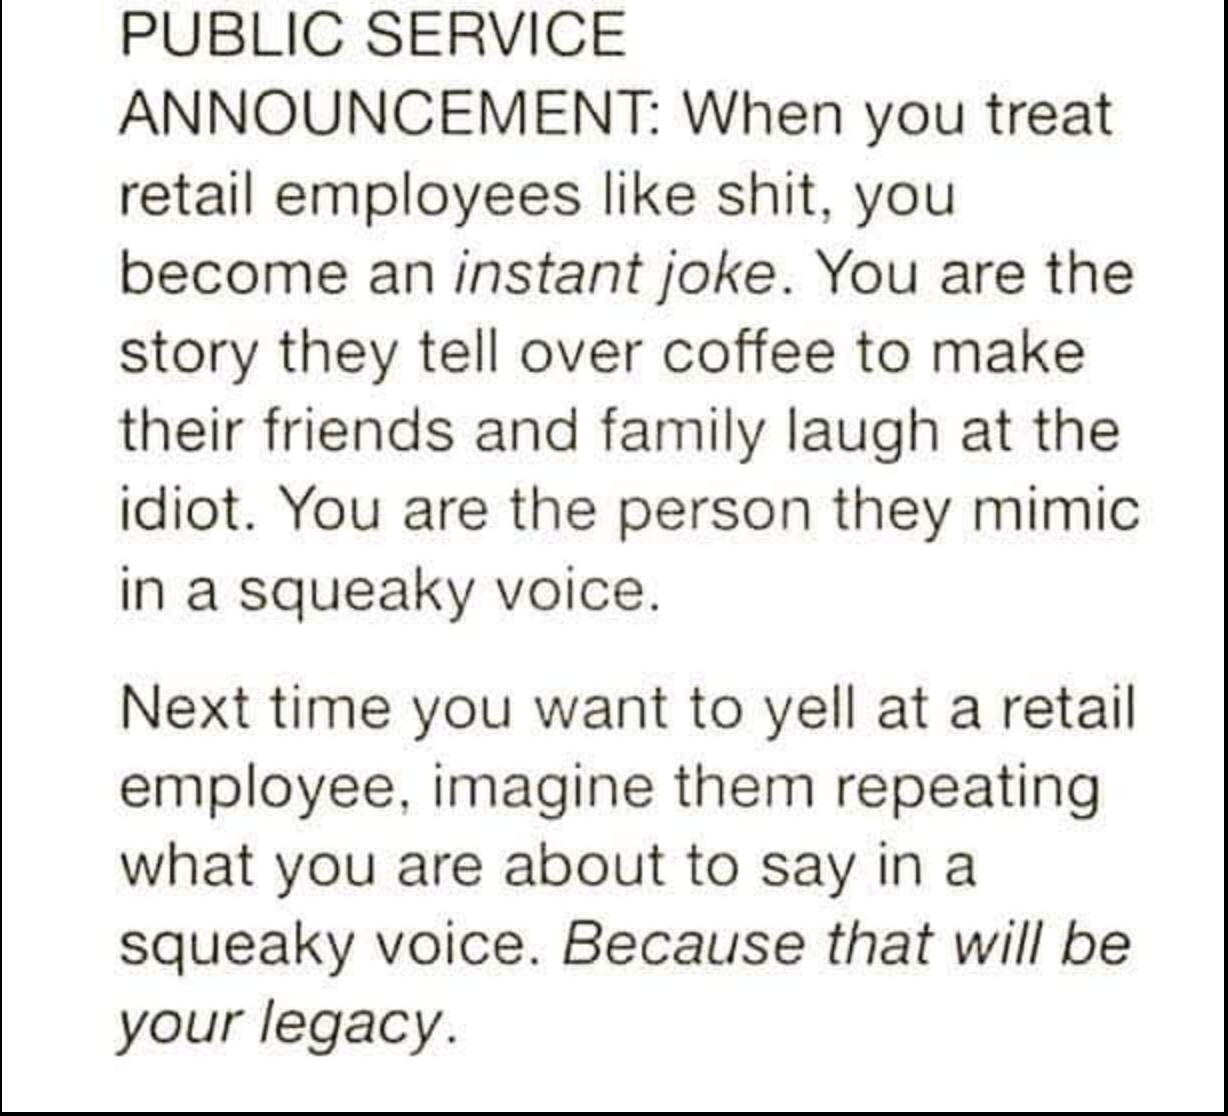 lil debbie white girl mob - Public Service Announcement When you treat retail employees shit, you become an instant joke. You are the story they tell over coffee to make their friends and family laugh at the idiot. You are the person they mimic in a squea